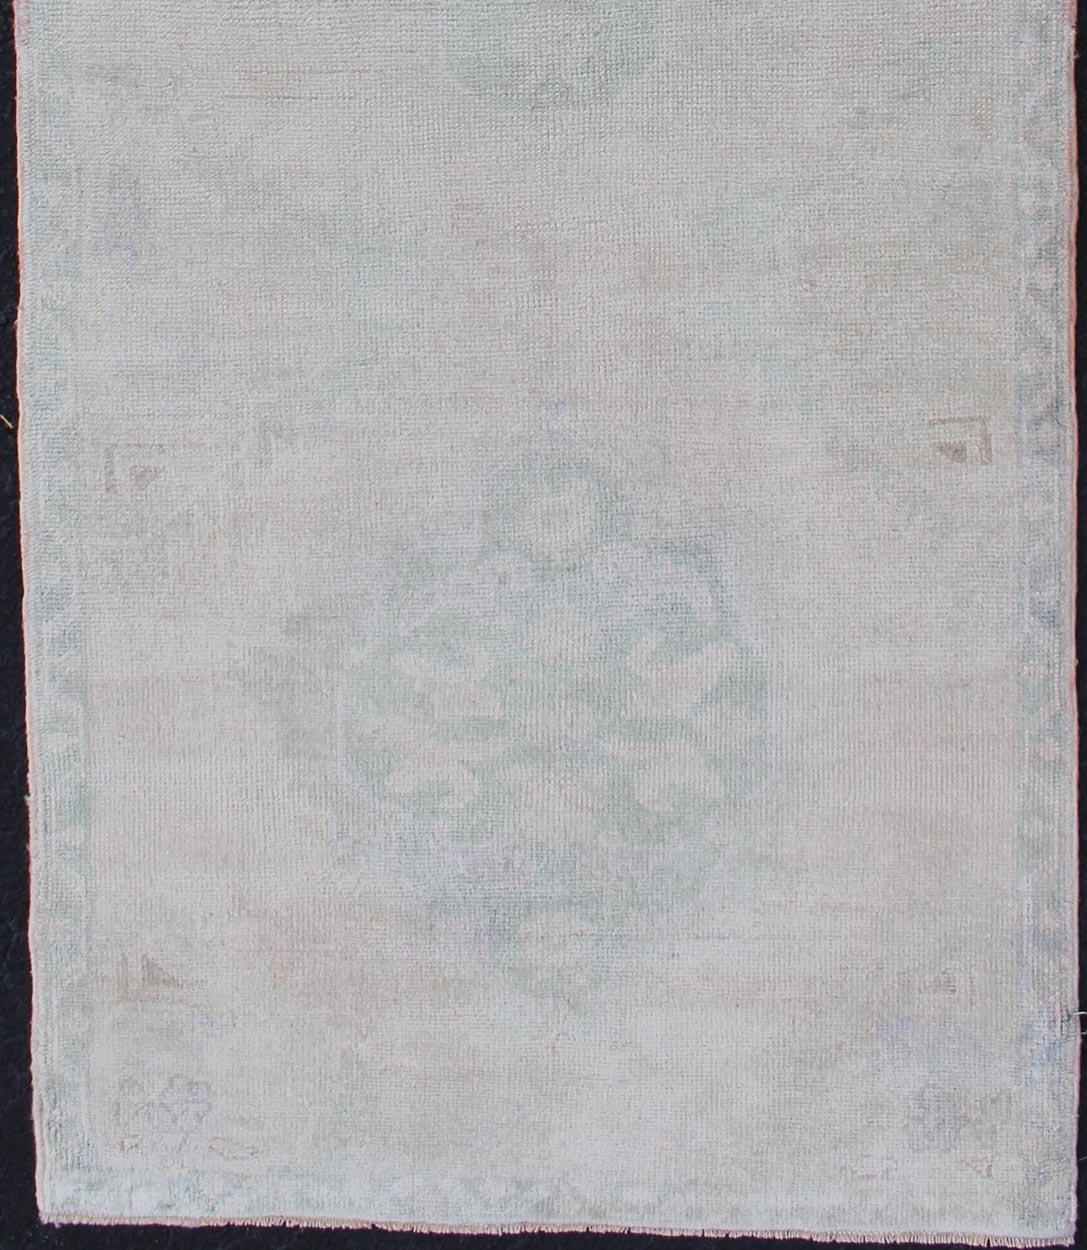 Oushak vintage rug from Turkey with tri-medallion design, rug tu-mtu-4911, country of origin / type: Turkey / Oushak, circa 1940.

This vintage Turkish Oushak rug features a multi-medallion design flanked by floral motifs and an overall faded